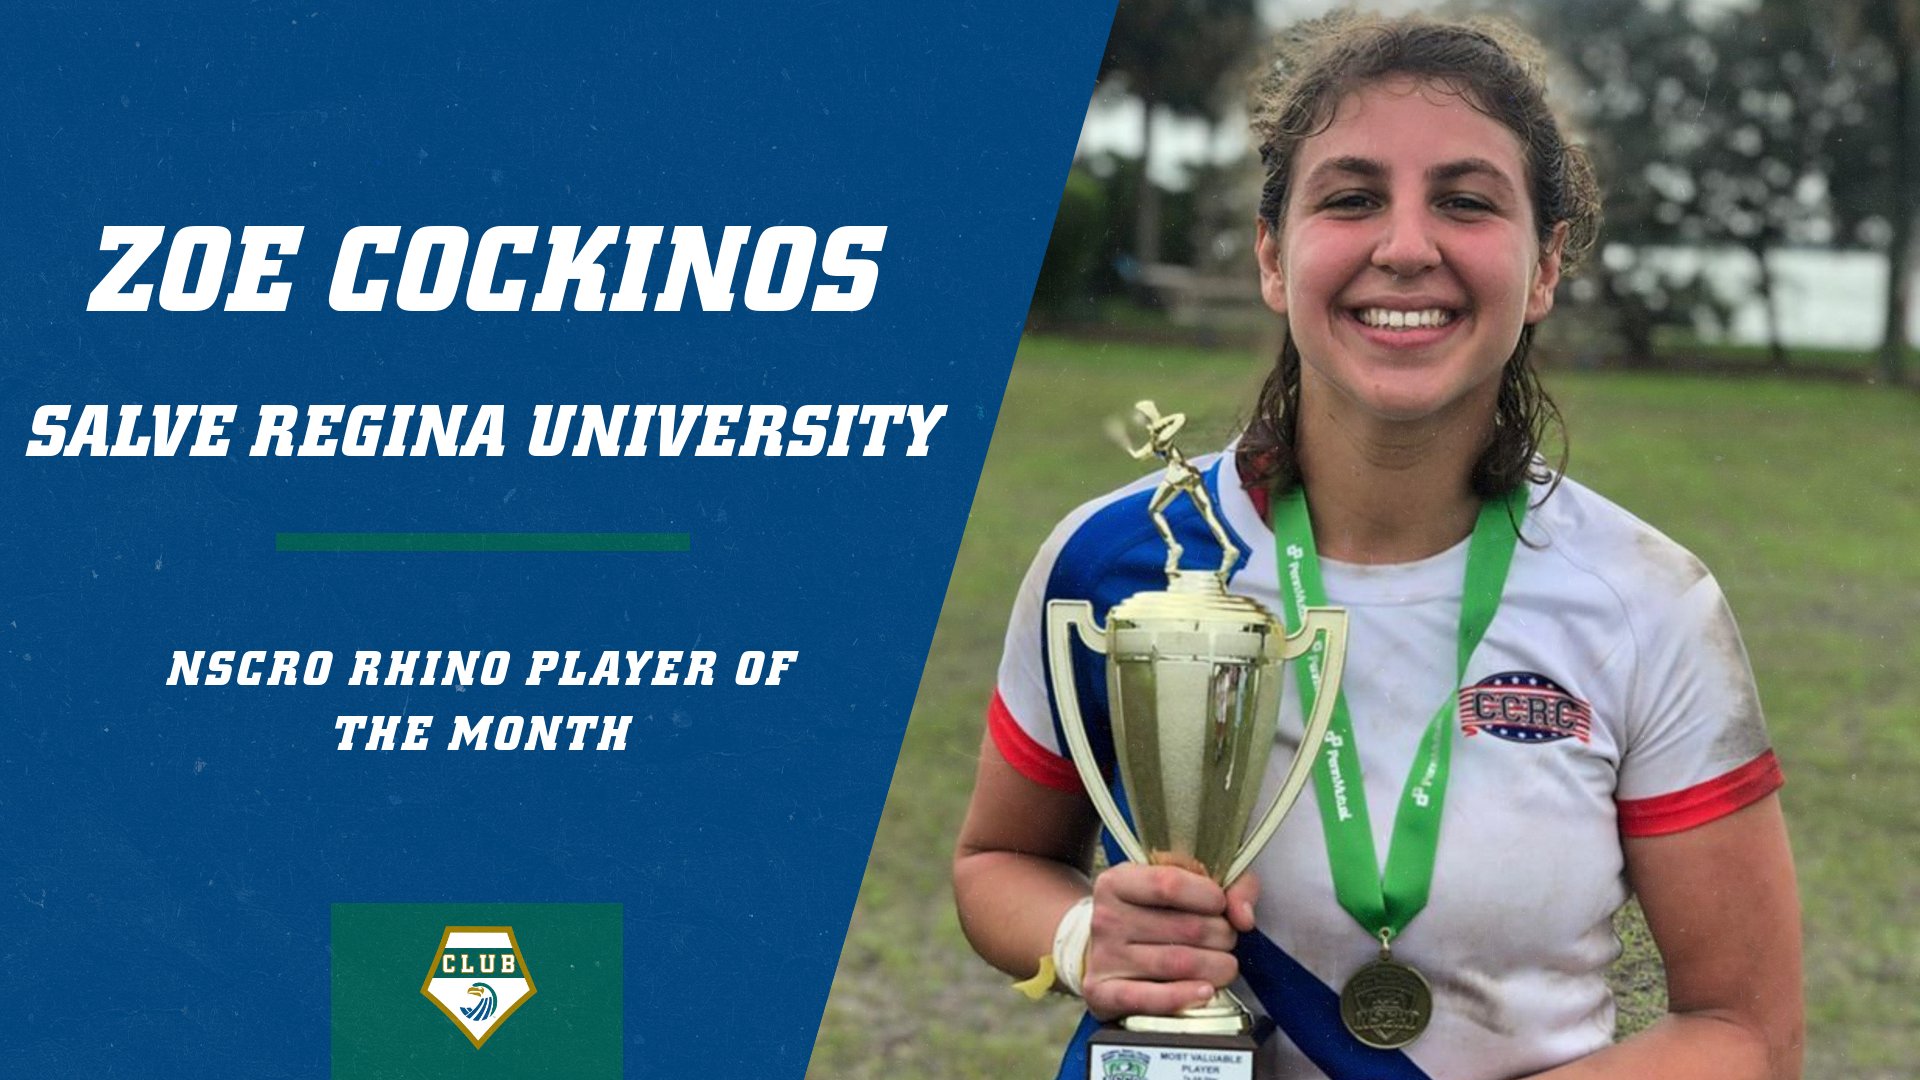 Zoe Cockinos was named NSCRO Rhino Player of the Month.